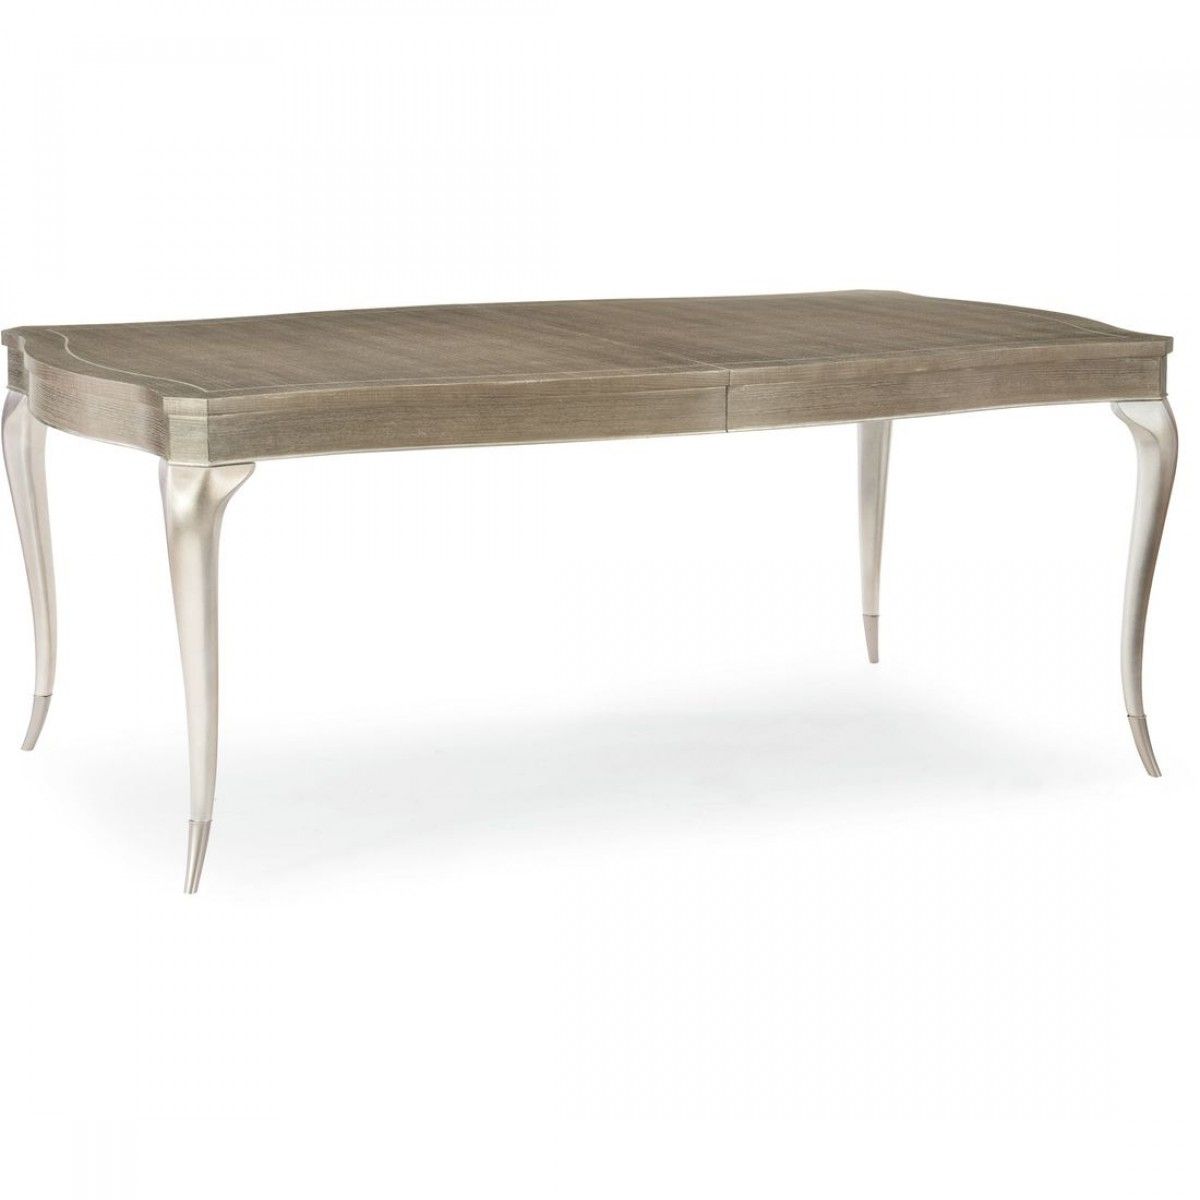 Caracole Avondale Rectangle Dining Table Within Most Popular Avondale Dining Tables (View 5 of 25)